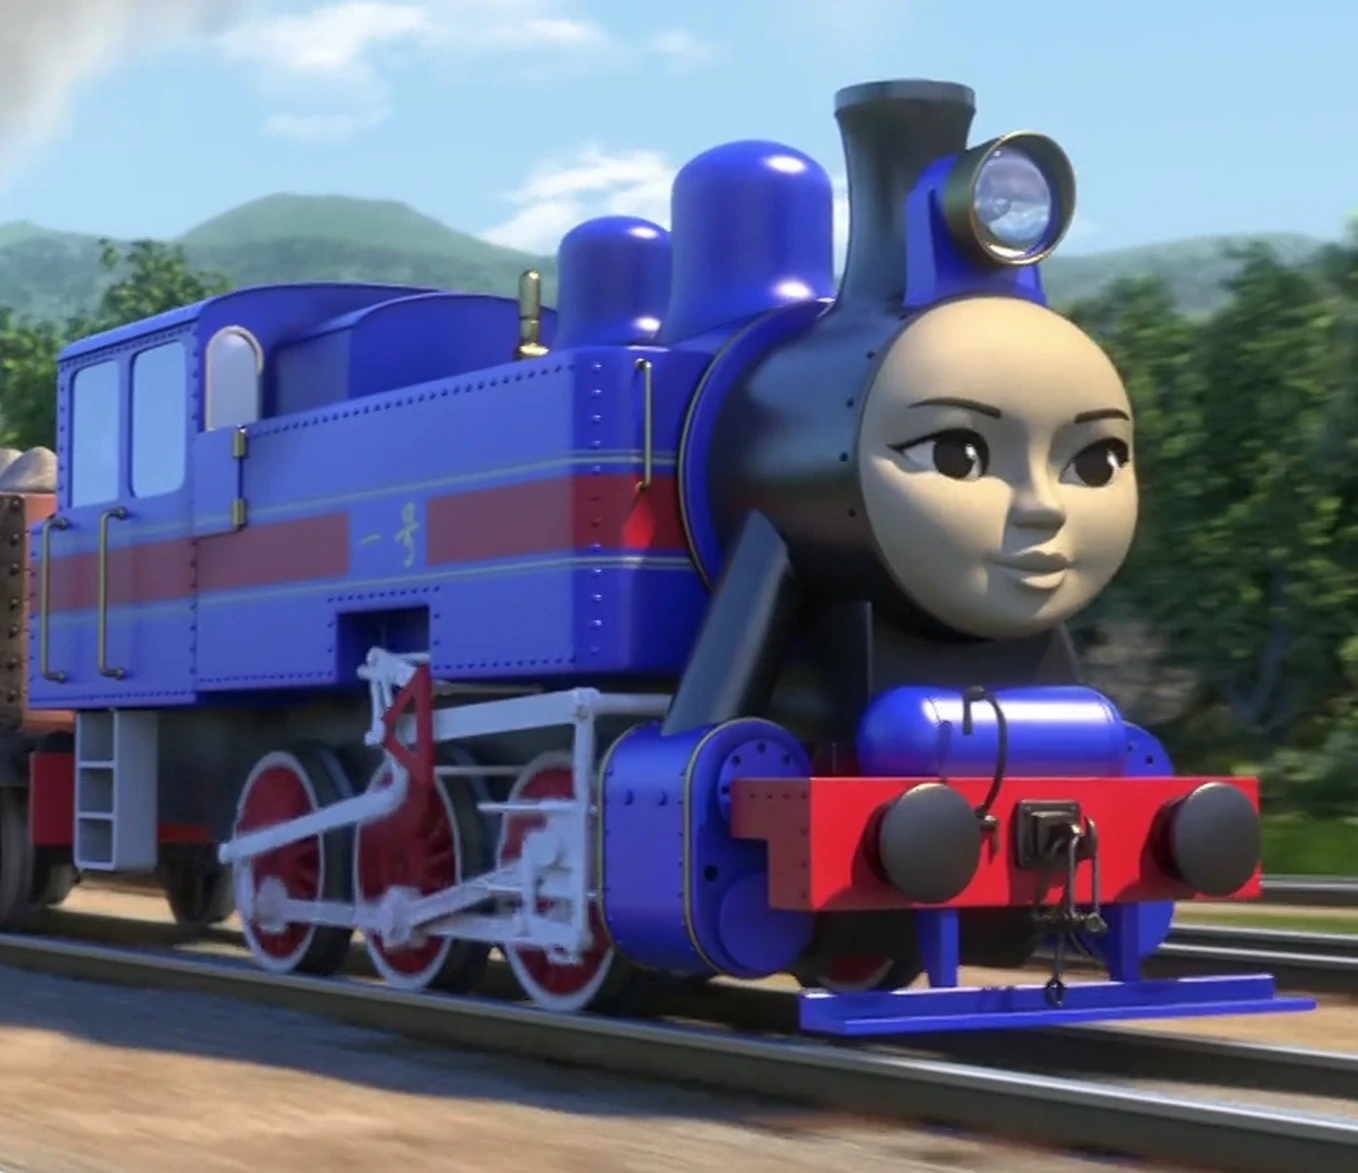 trackmaster hong mei